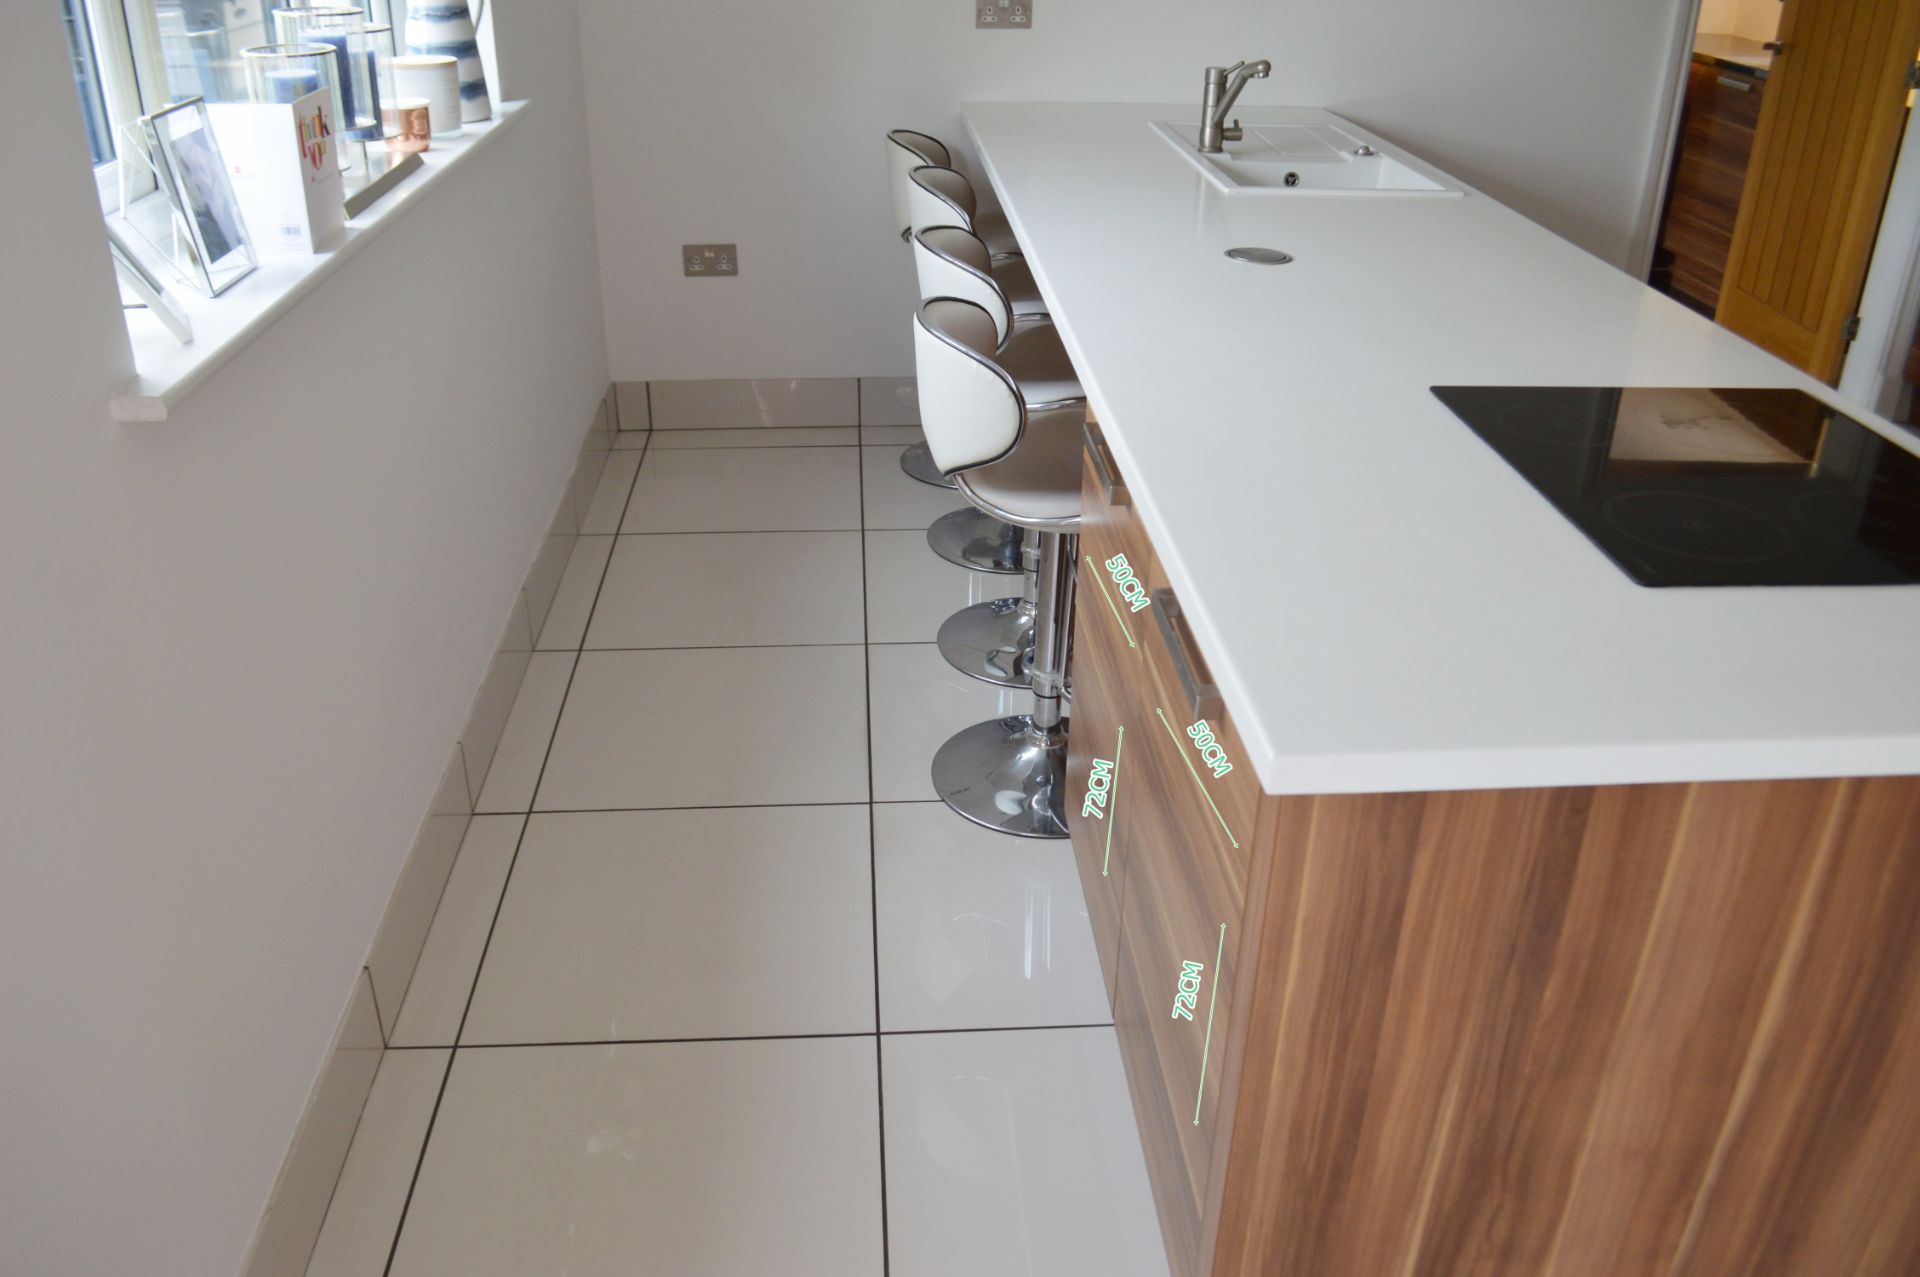 1 x Contemporary Bespoke Fitted Kitchen And Utilty Room  With Integrated Neff Branded Appliances, - Image 7 of 32